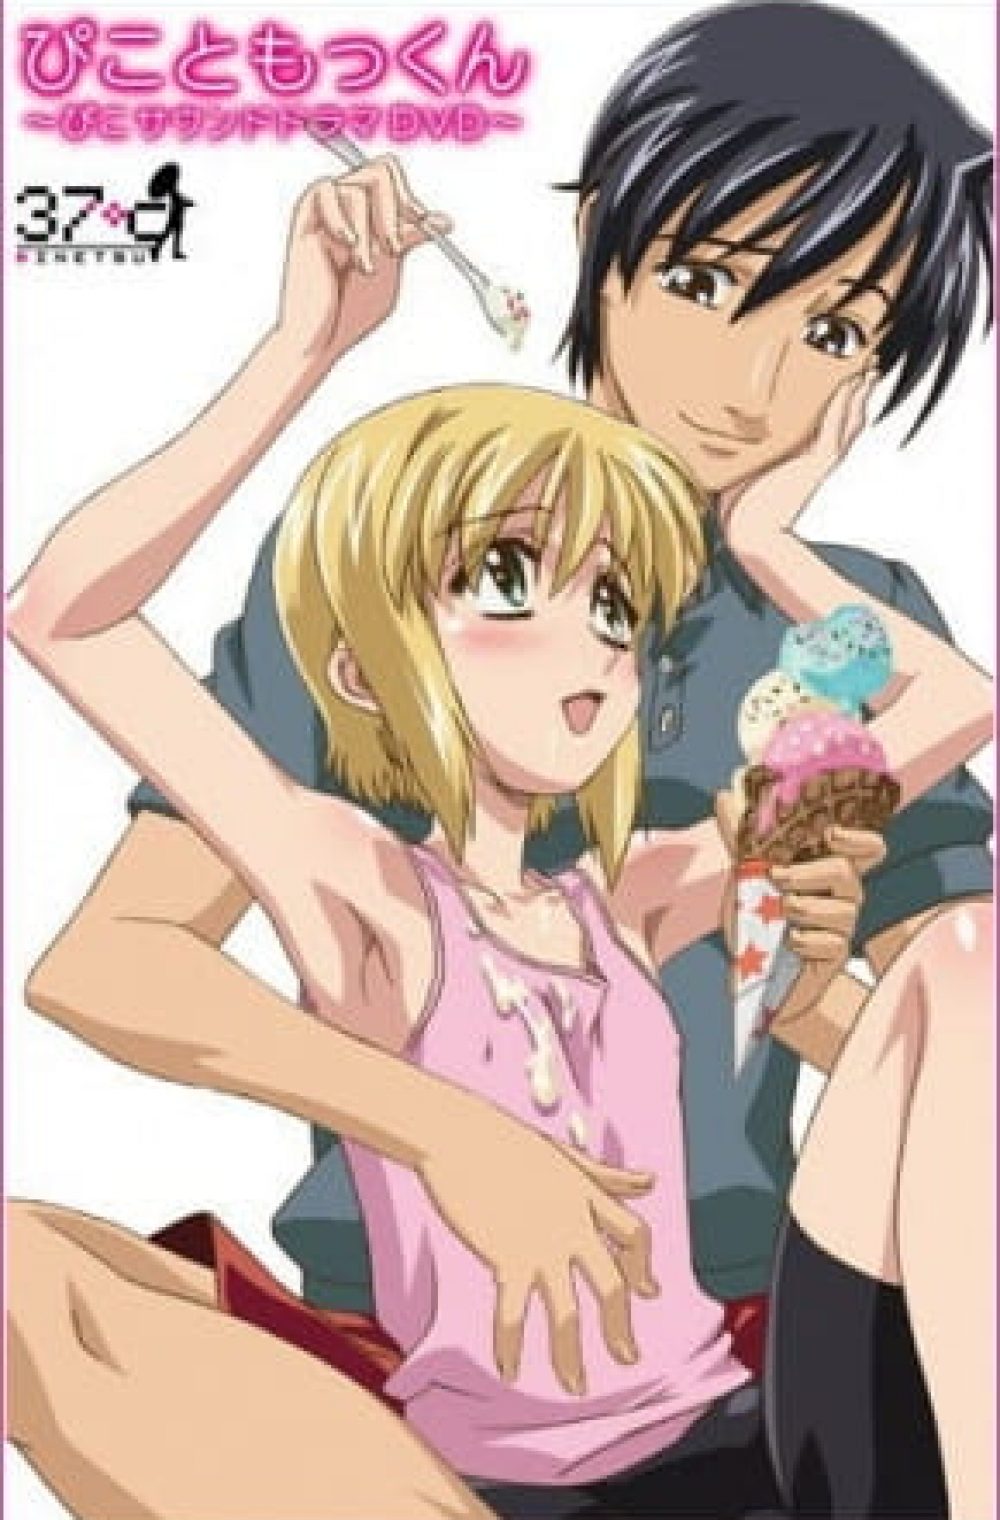 desiree caravello recommends boku no pico full episode online pic